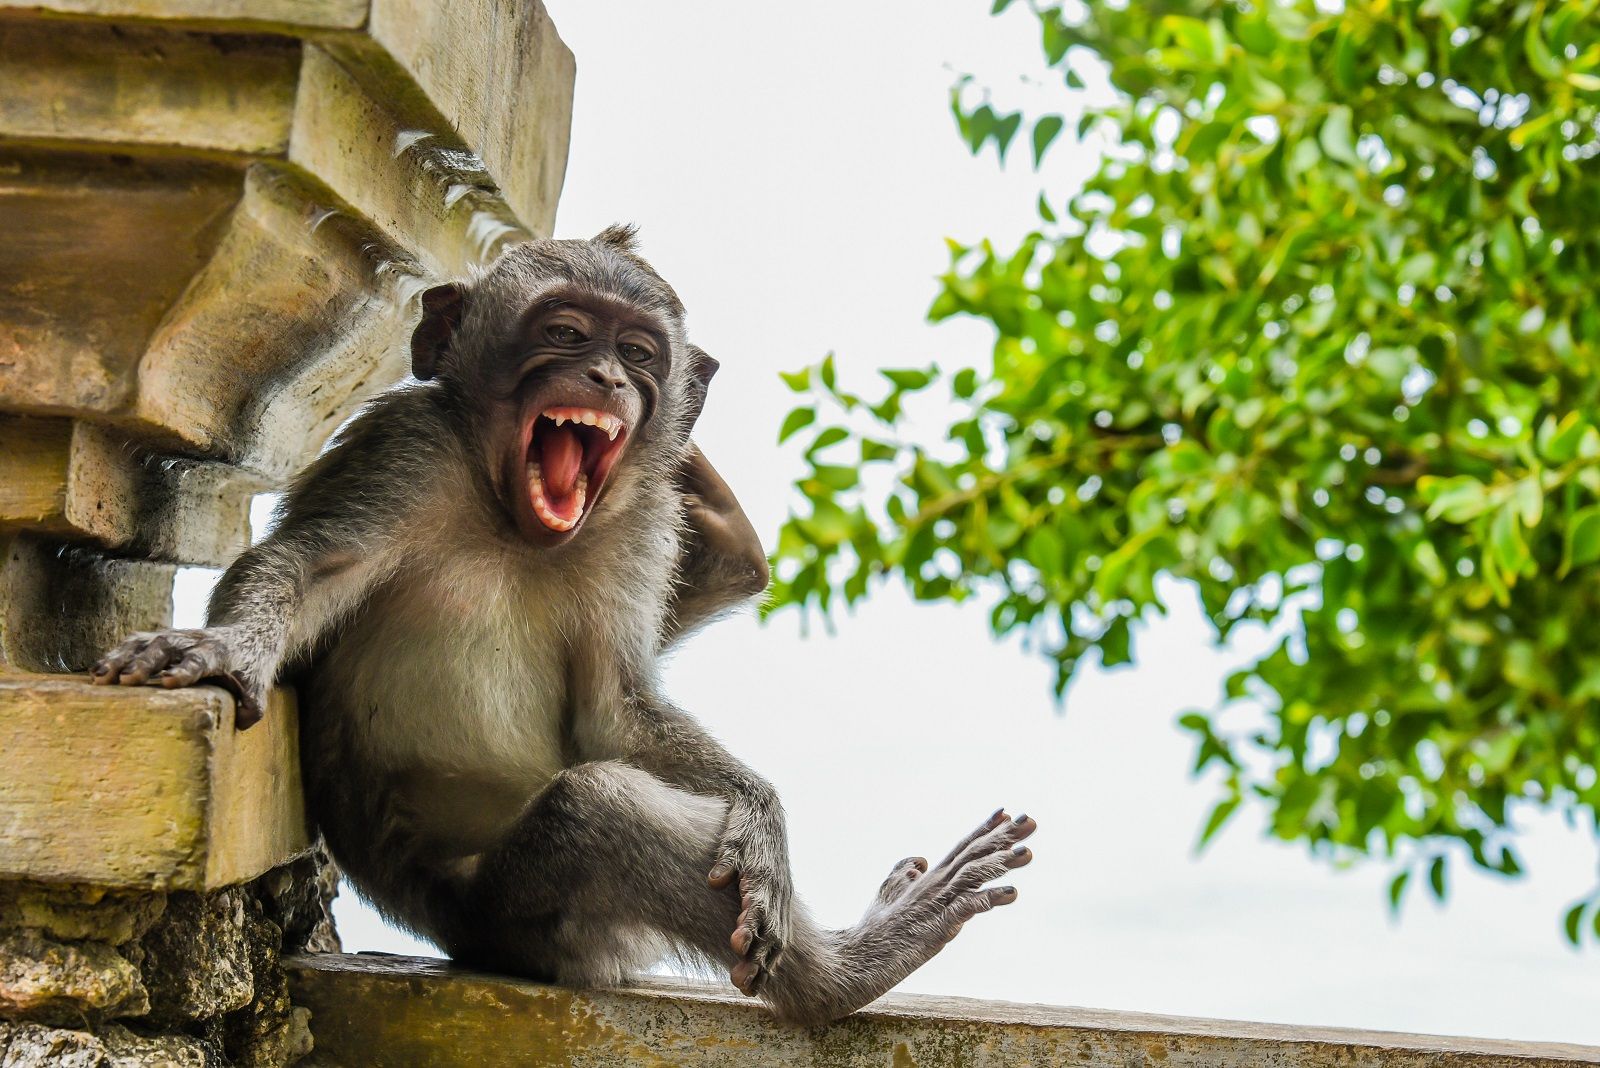 Enjoy a good giggle with the Comedy Wildlife Photography awards photo 20